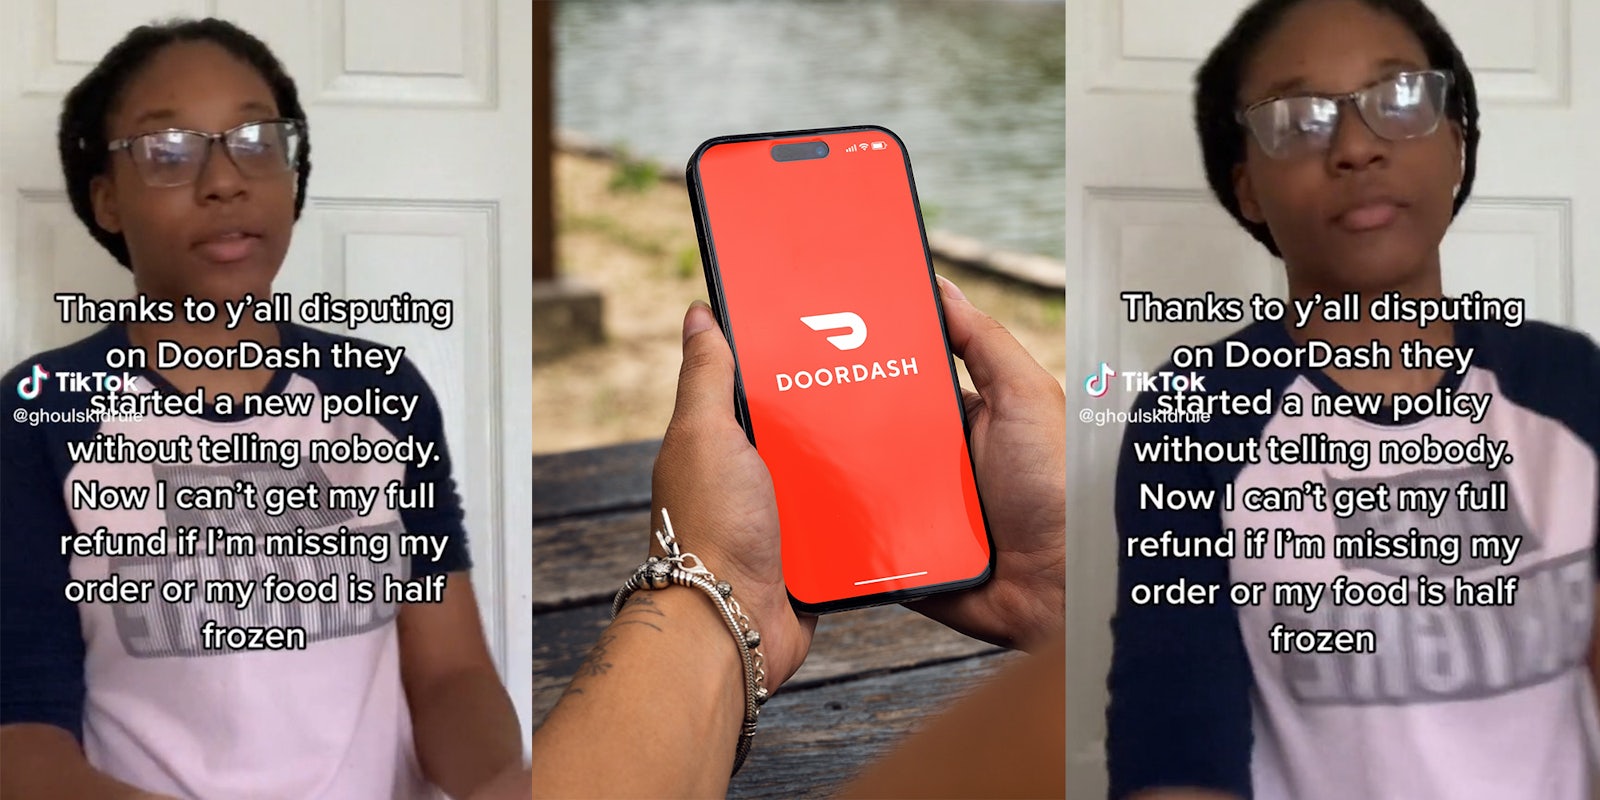 Customer claims DoorDash quietly rolled out new refund policy